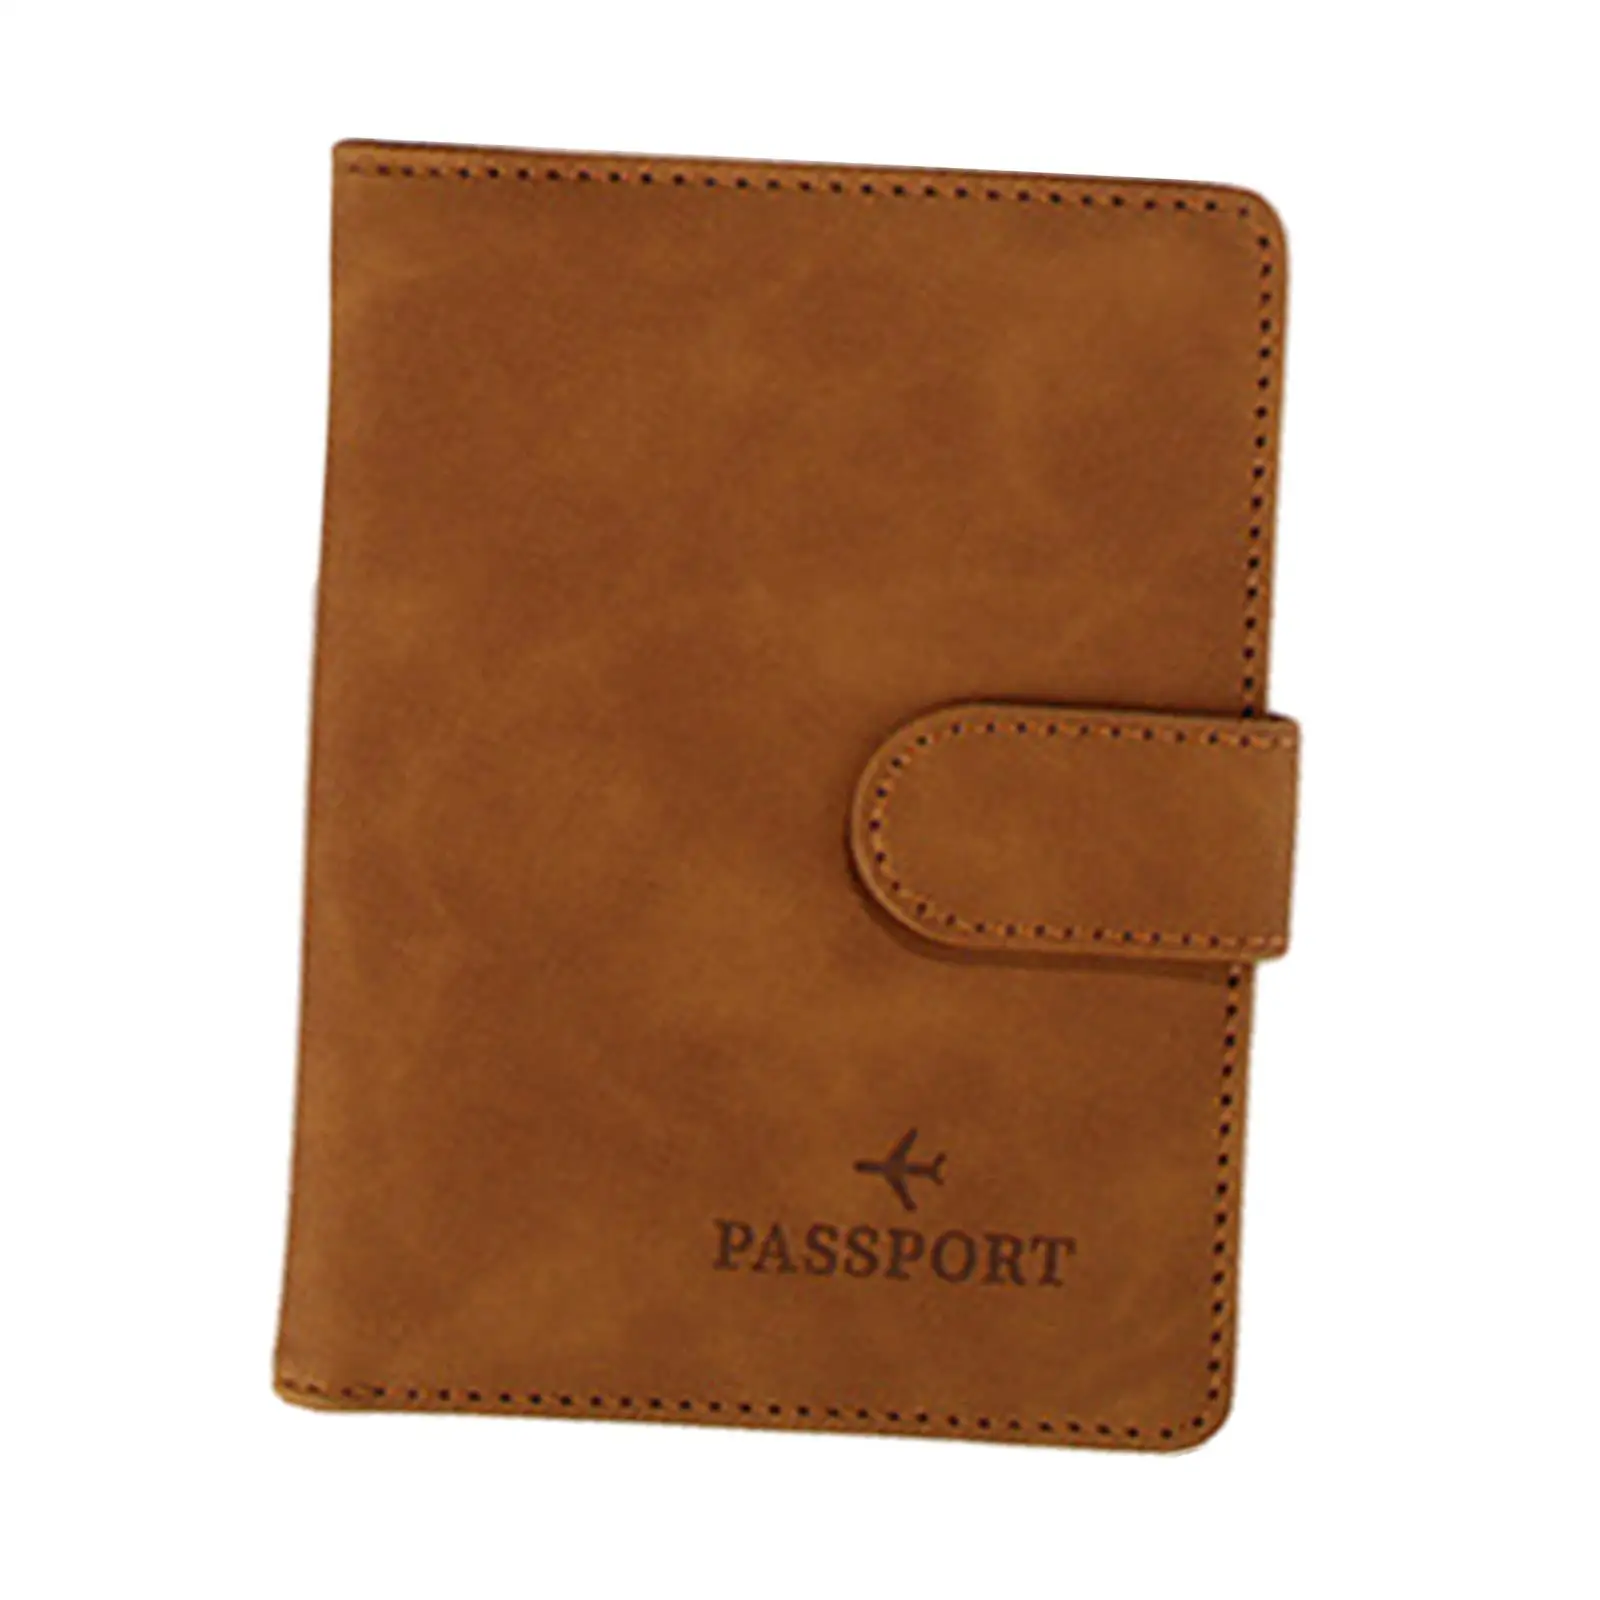 Passports Holder Card Pouch with Phone Card Slot Travel Gifts PU Leather Card Case for Business Travel Home Family Woman and Man